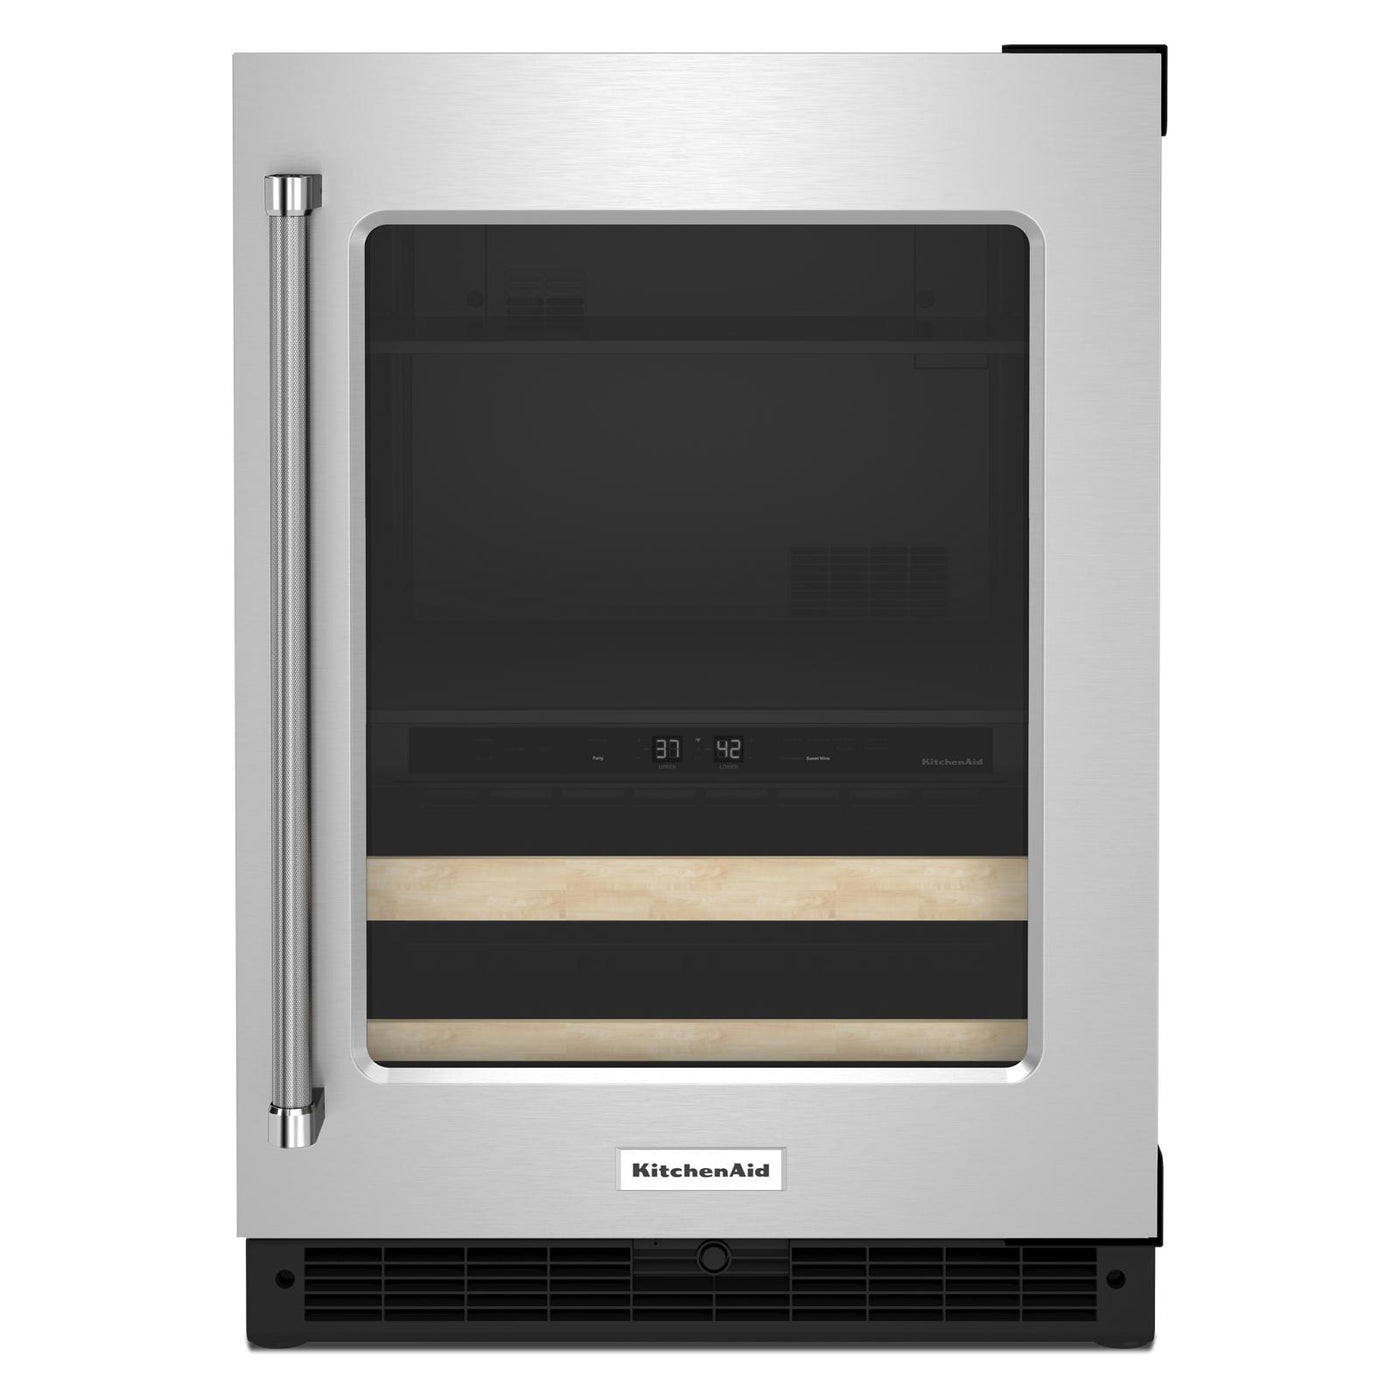 KitchenAid Stainless Steel 24" Beverage Centre with Glass Door and Wood-Front Racks (4.89 Cu.Ft) - KUBR214KSB